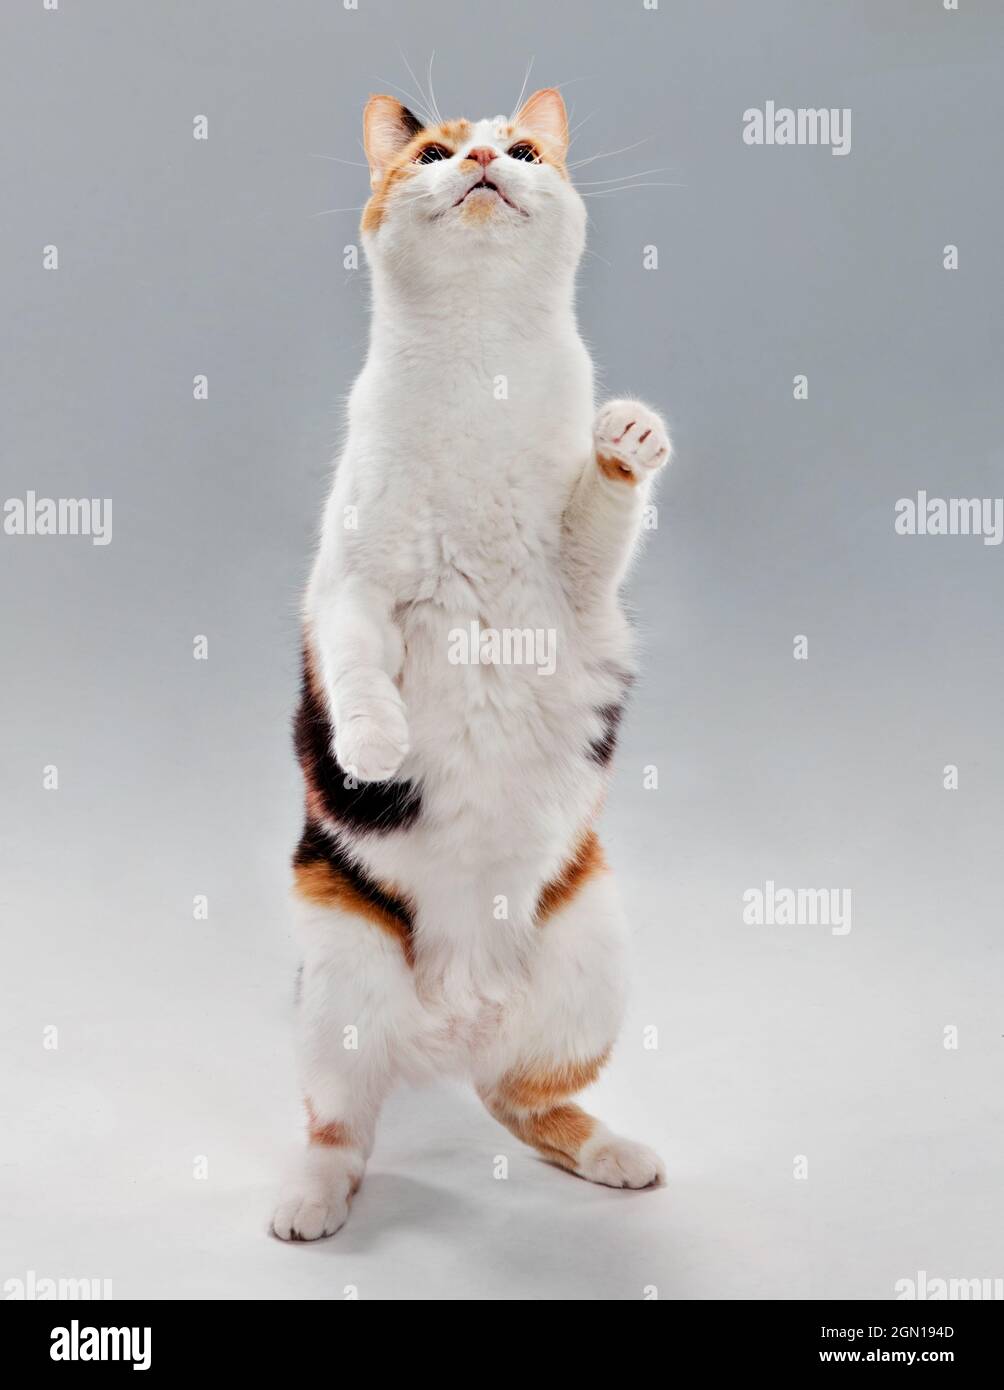 Studio portrait of a calico cat standing on two legs smiling and looking upward. Stock Photo